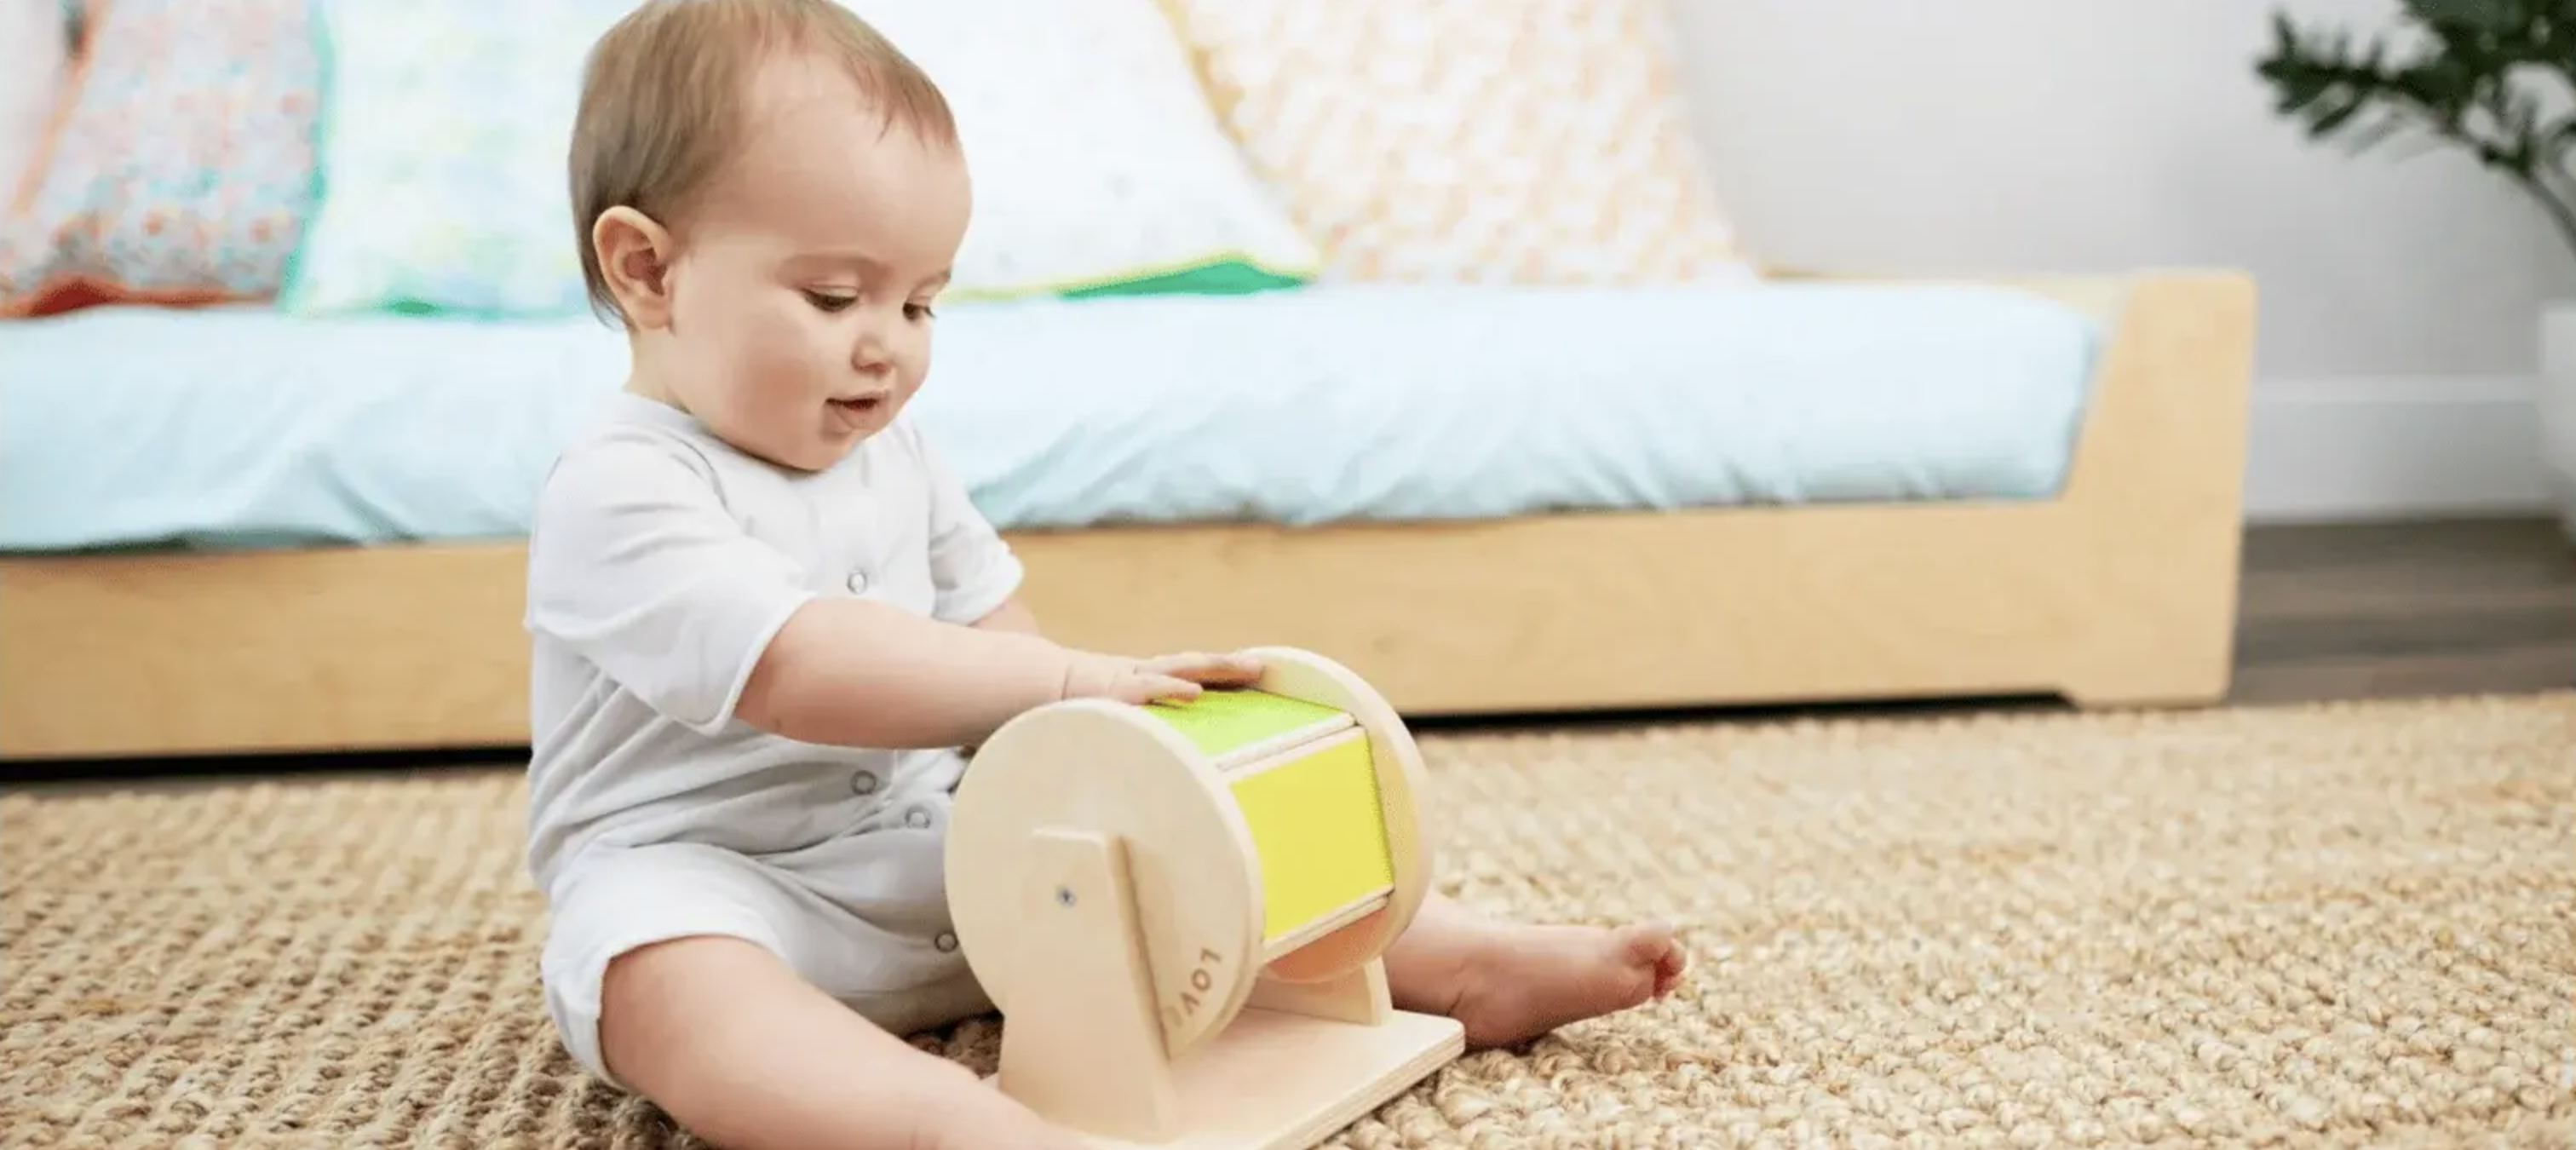 Montessori-Inspired Learning Toys & Playthings